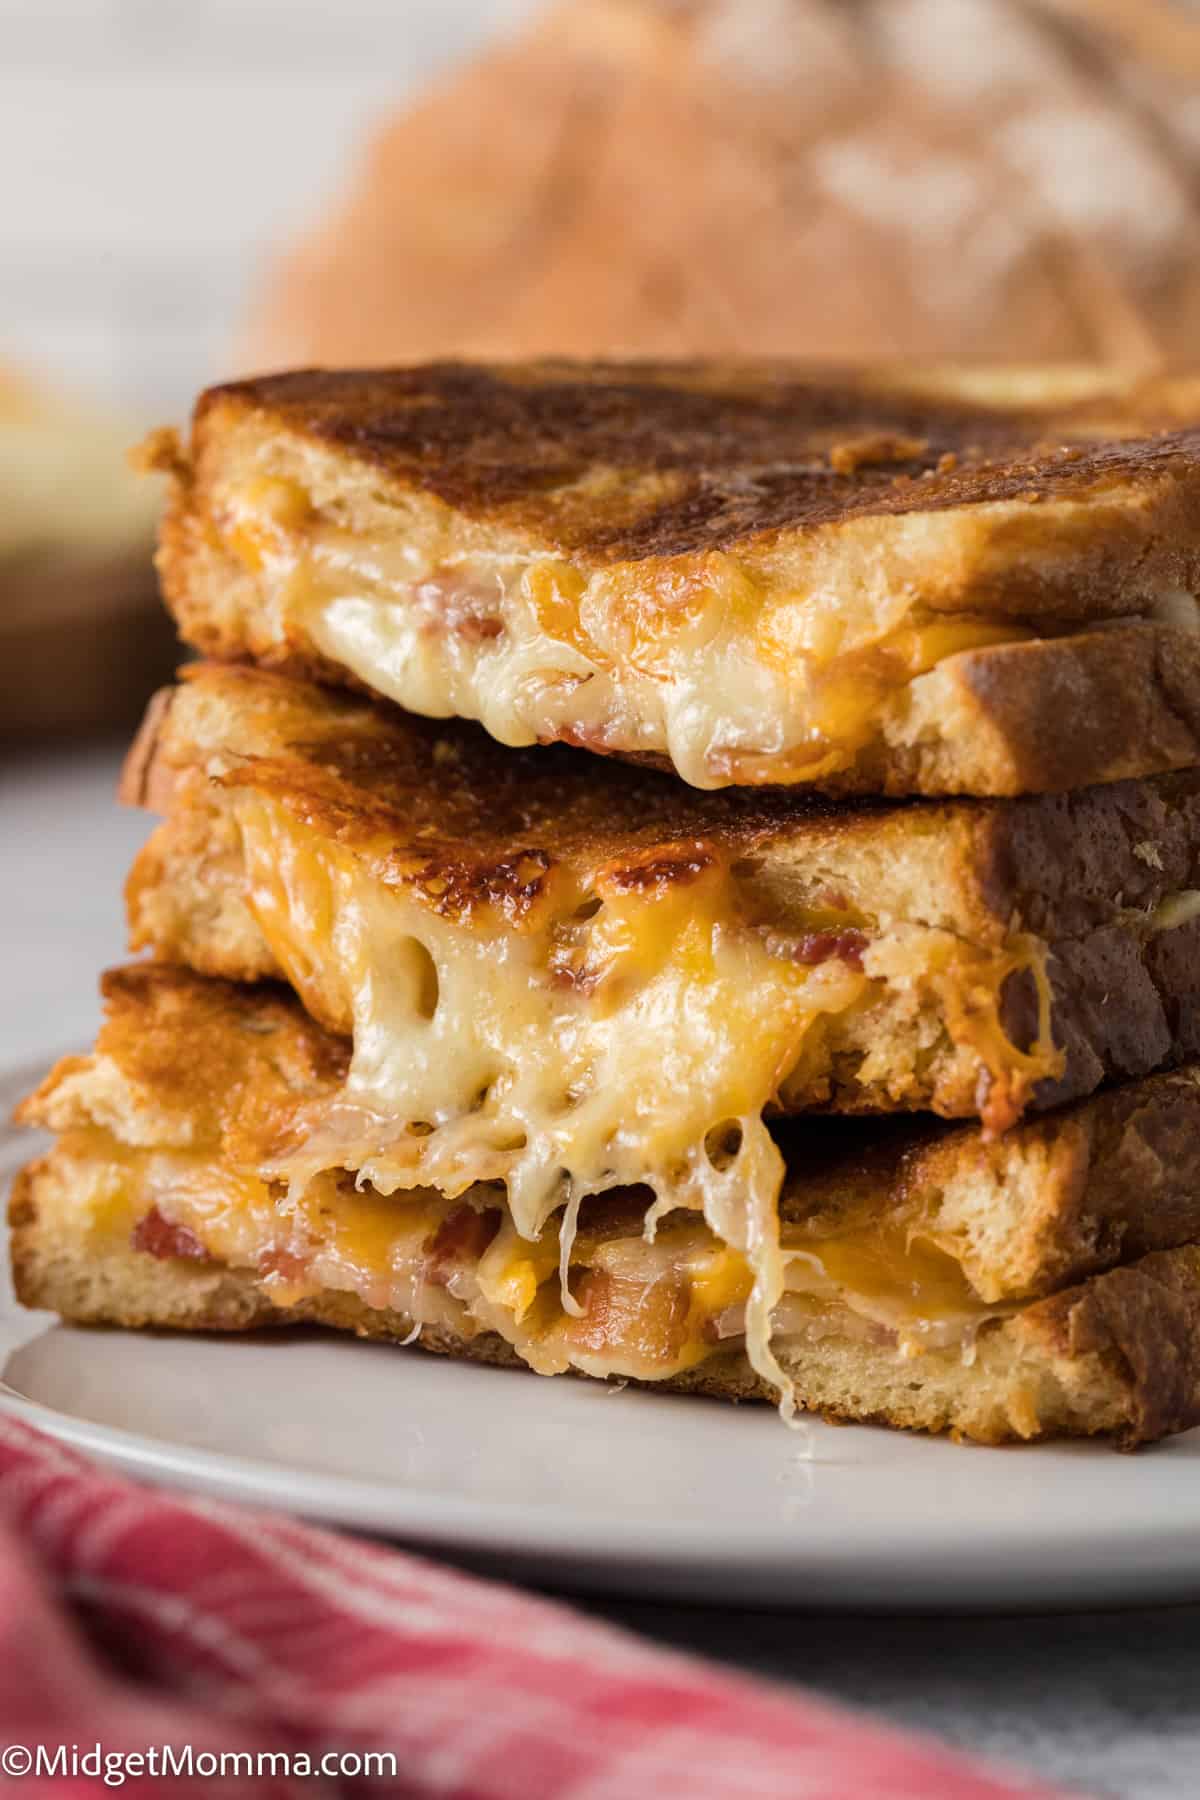 Bacon Grilled Cheese Recipe - Eating on a Dime